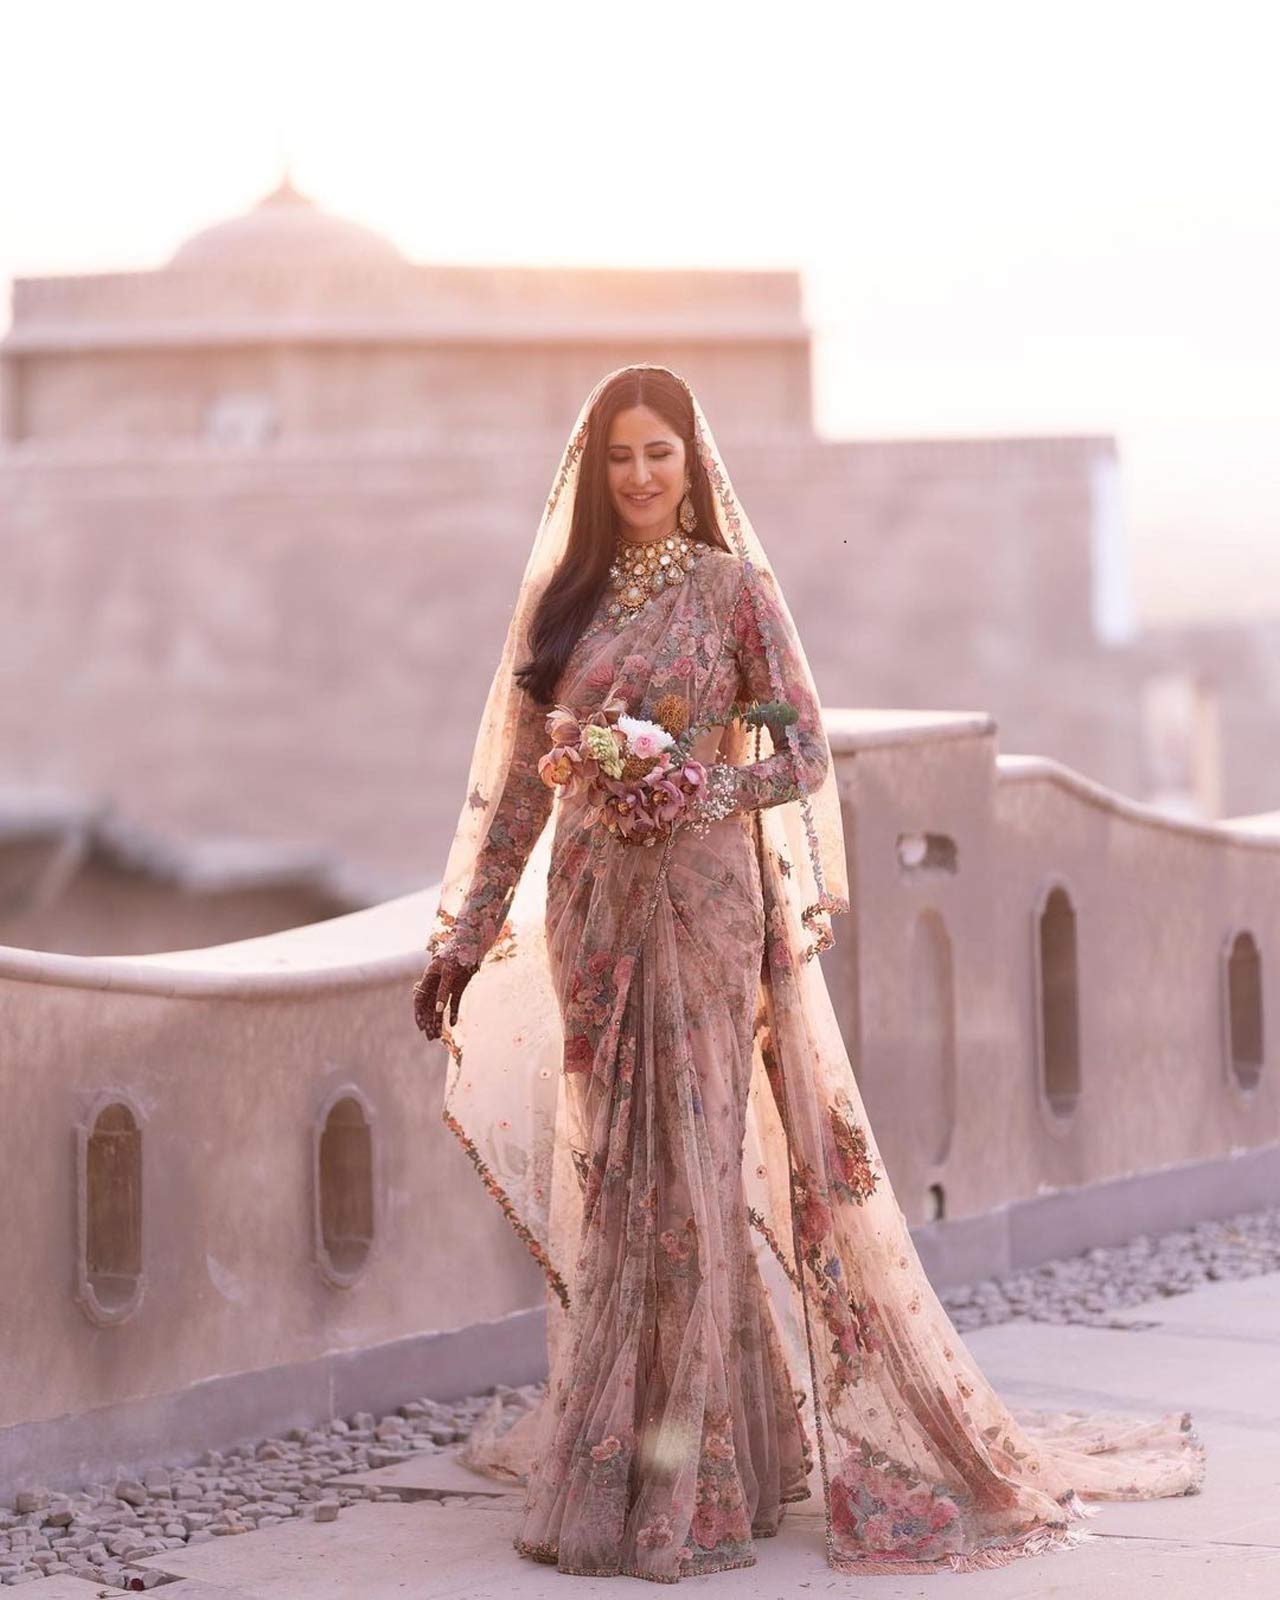 Giving out the details about her outfit, Sabyasachi's Instagram account gave out her ensemble details. He wrote. 